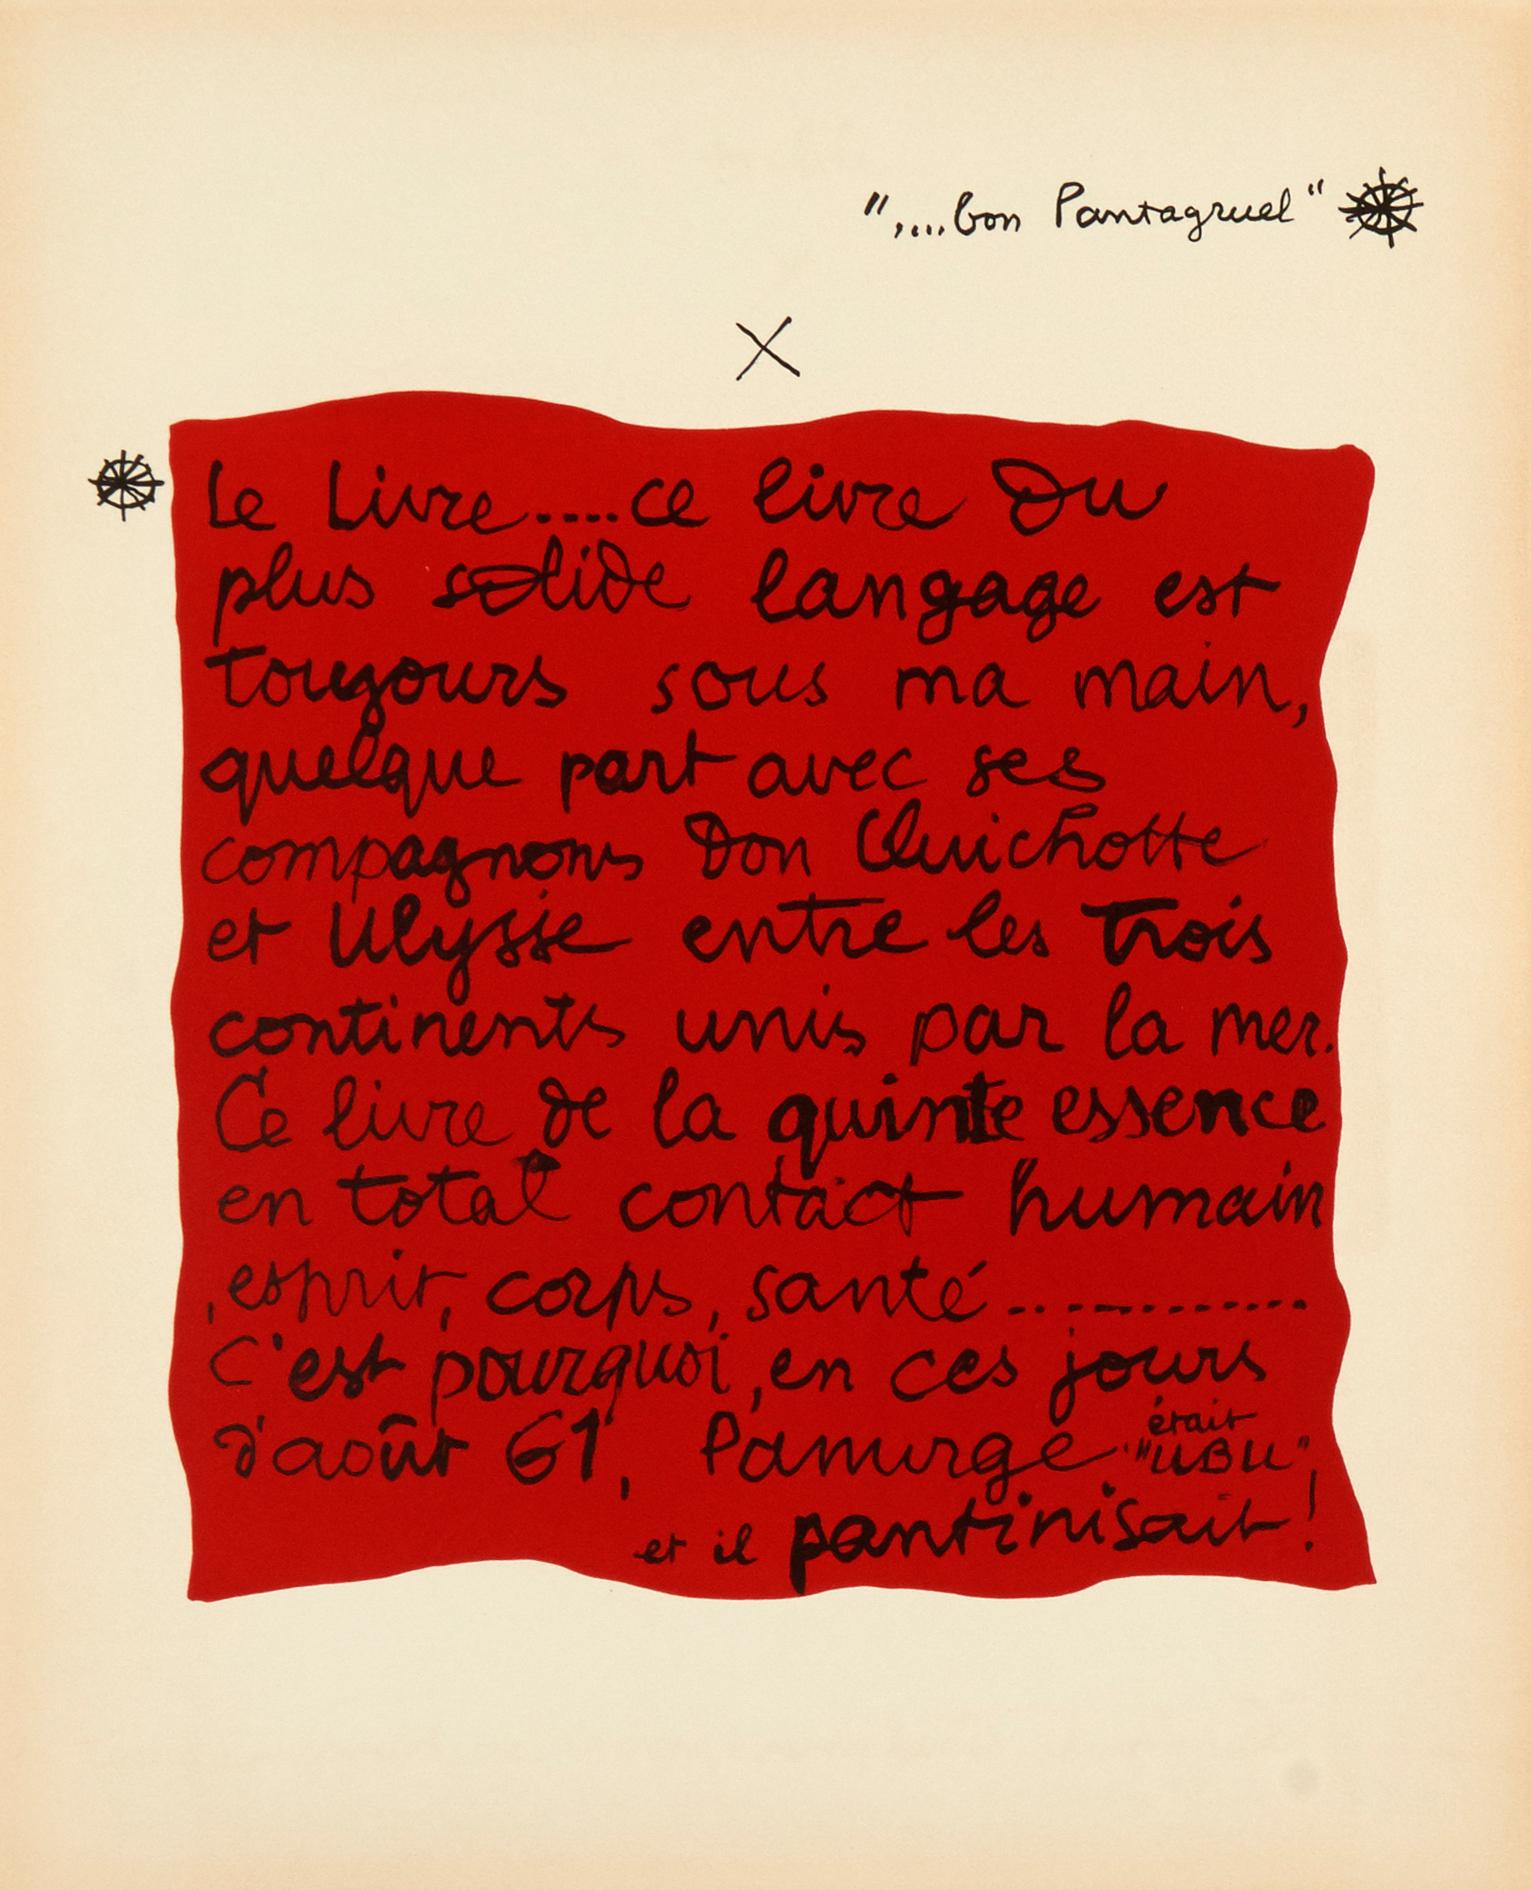 Le Corbusier Serie Panurge, printed by Mourlot, Paris 1962, is an interpretation of Rabelais’ series of novels: Gargantua and Pantagruel. This stunning portfolio is comprised of a title page in colour, one text page in colour, the justification